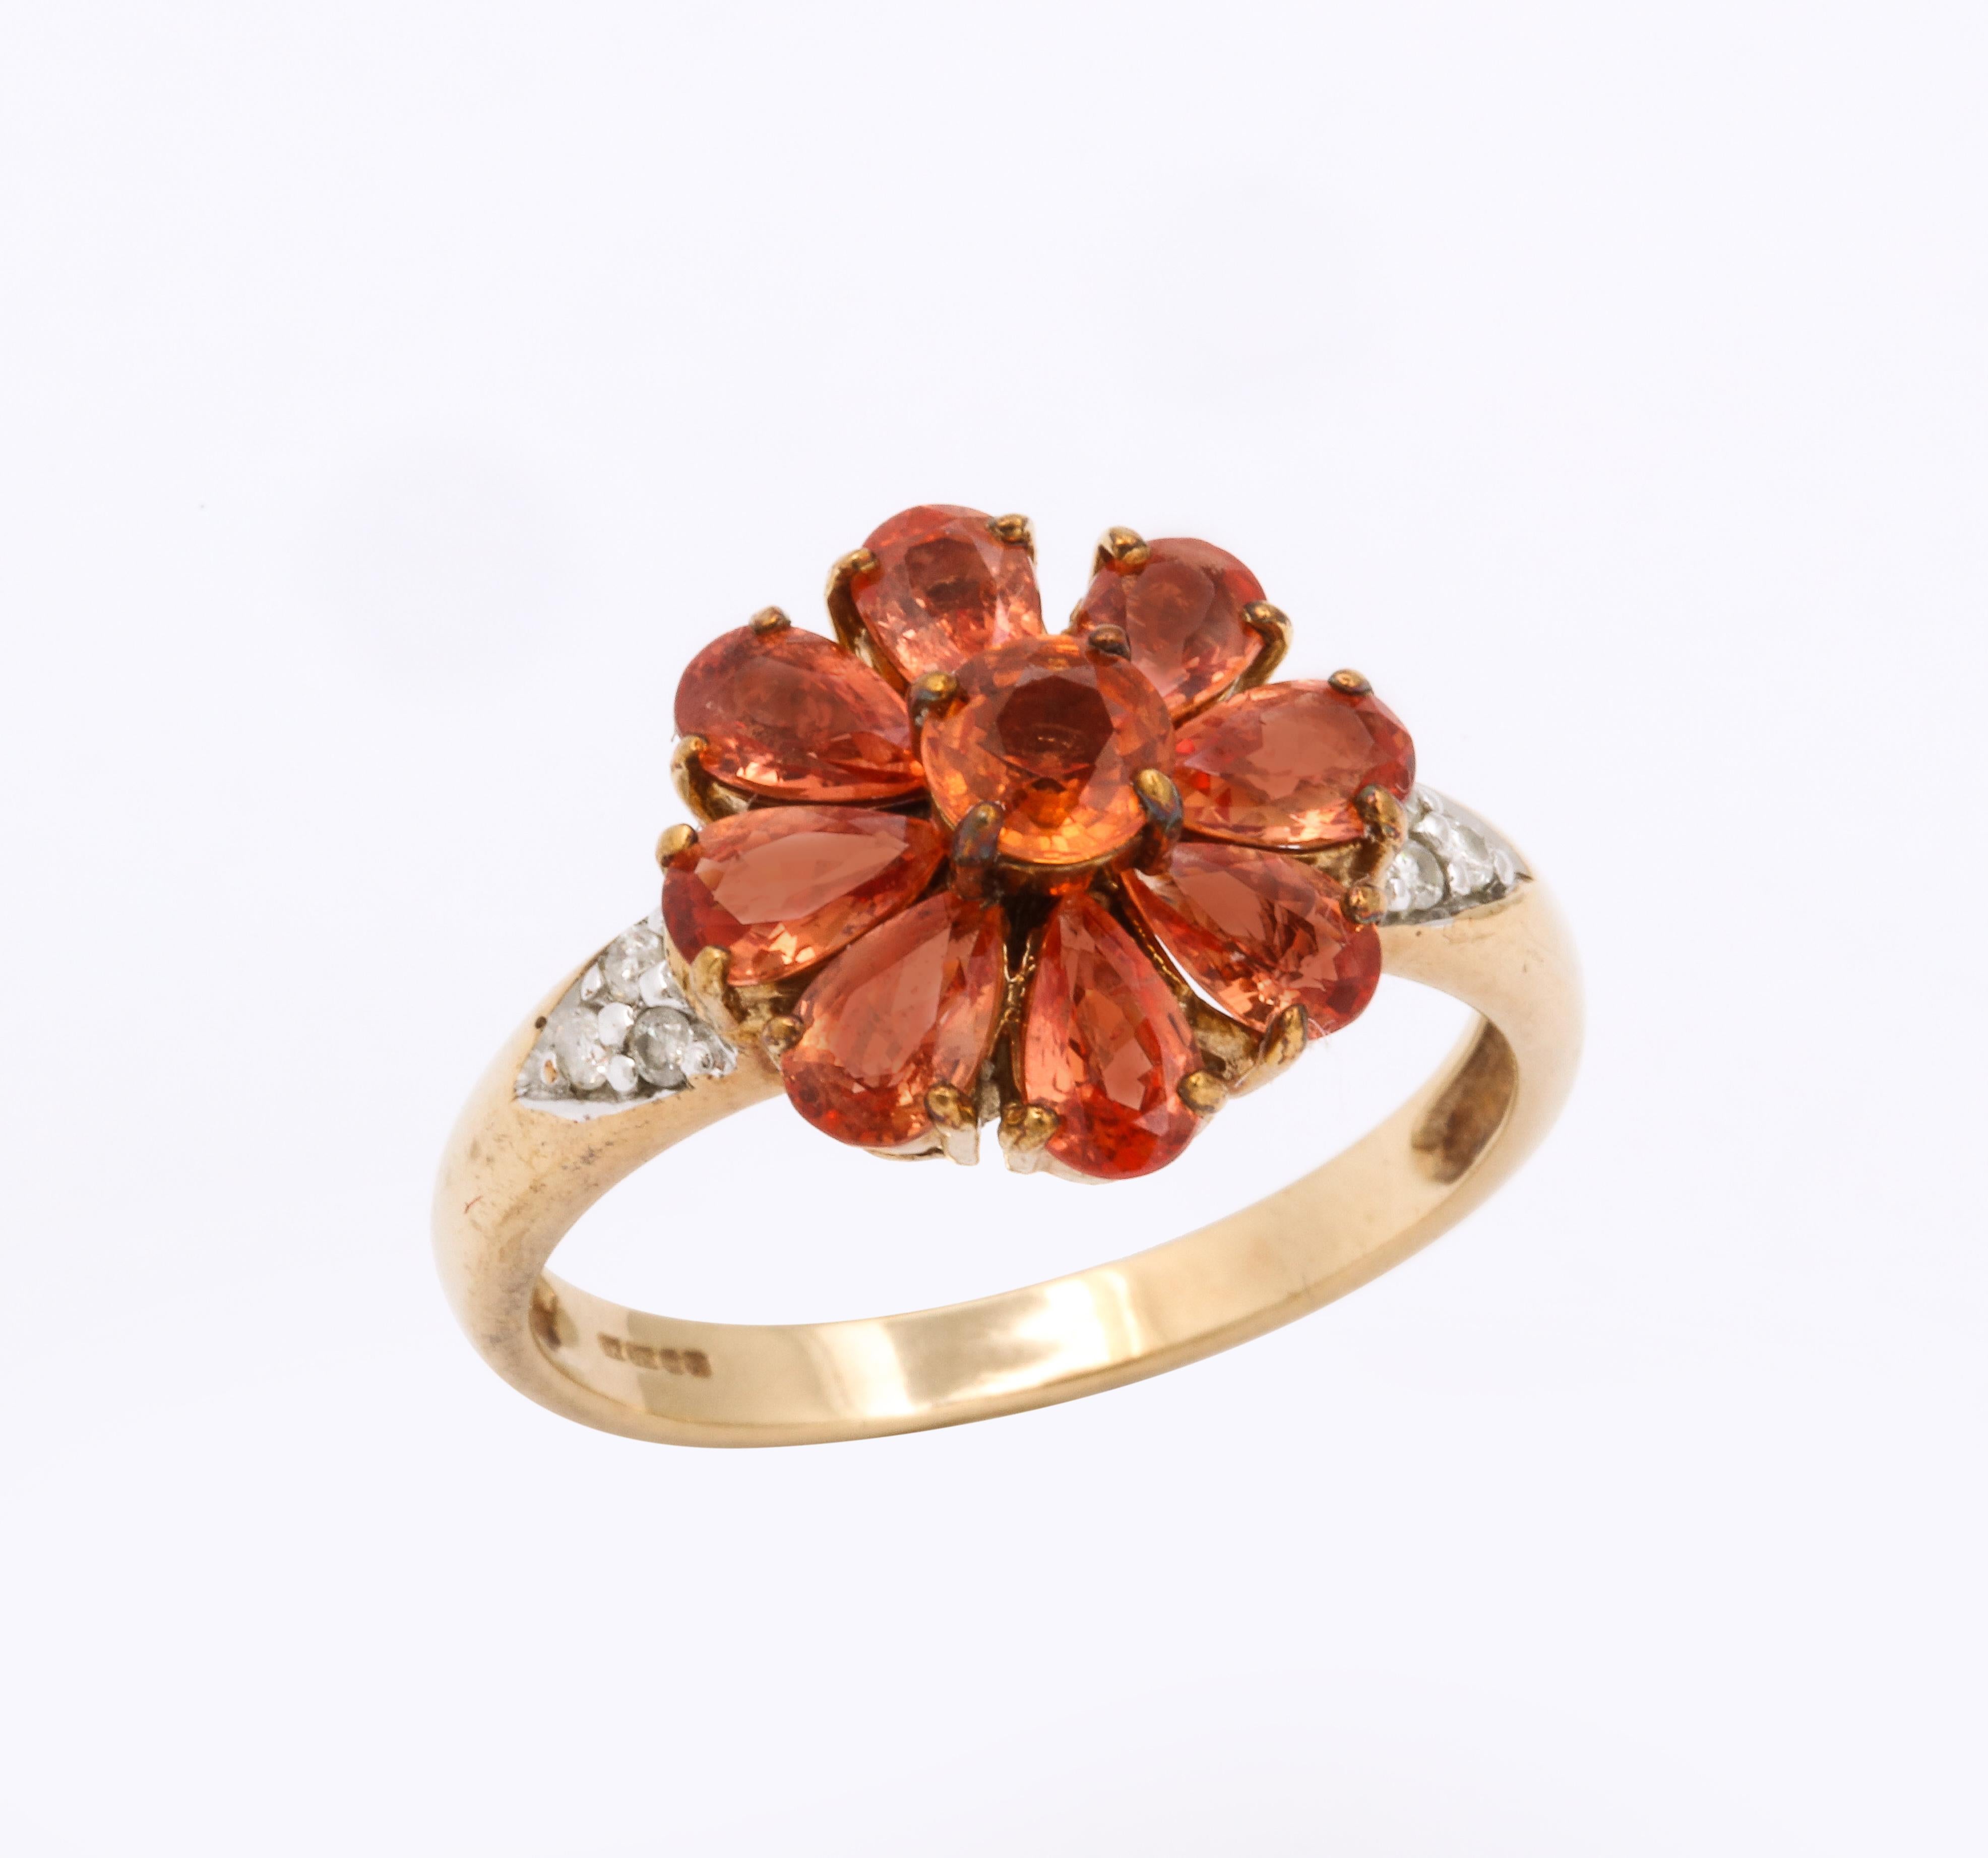 The color of the pear shaped sapphires in this 1907 ring is a honey orange bronze. That is the best color description I can come up with the saturated orange gems. The form is a floral daisy which calls forth the memory of she/he loves me or loves